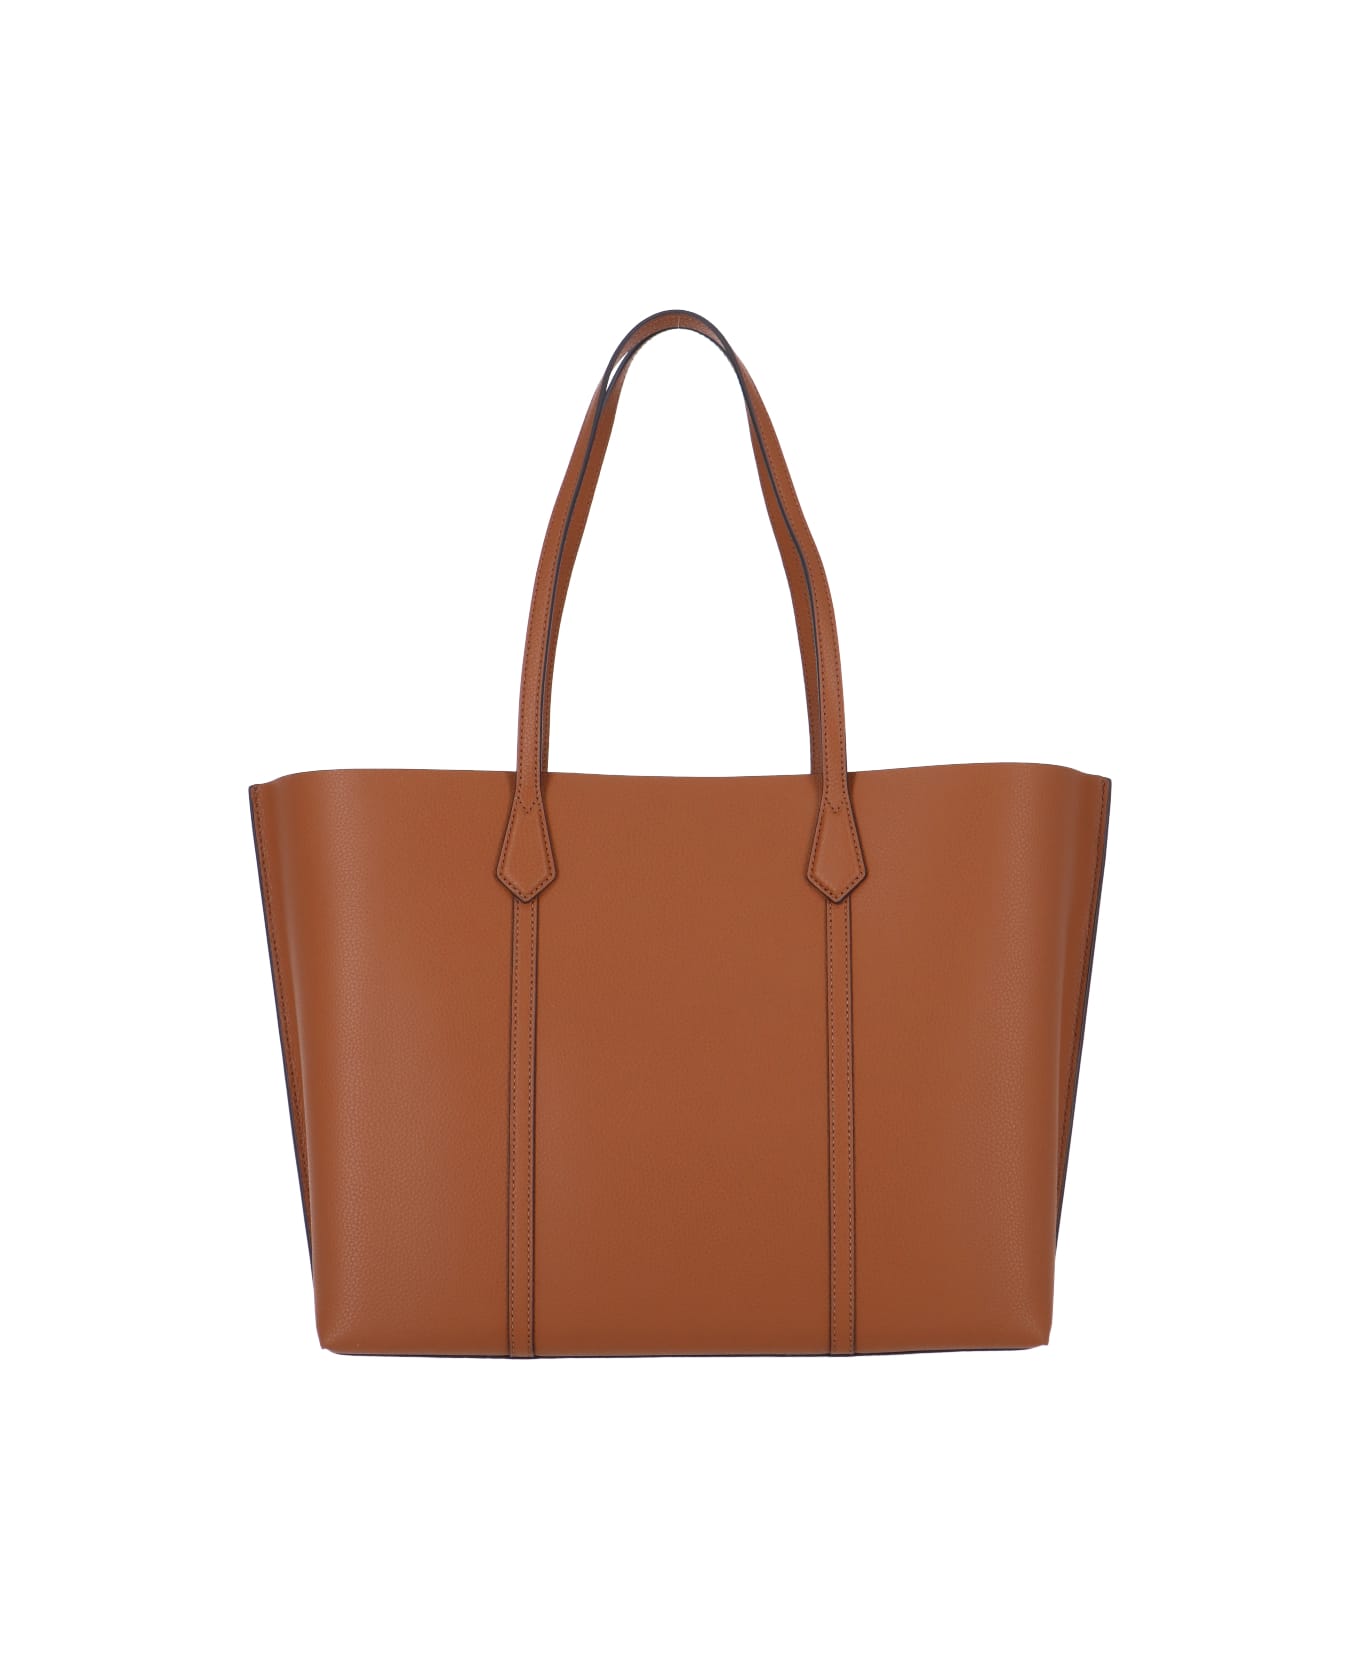 Tory Burch 'perry' Tote Bag - Brown トートバッグ